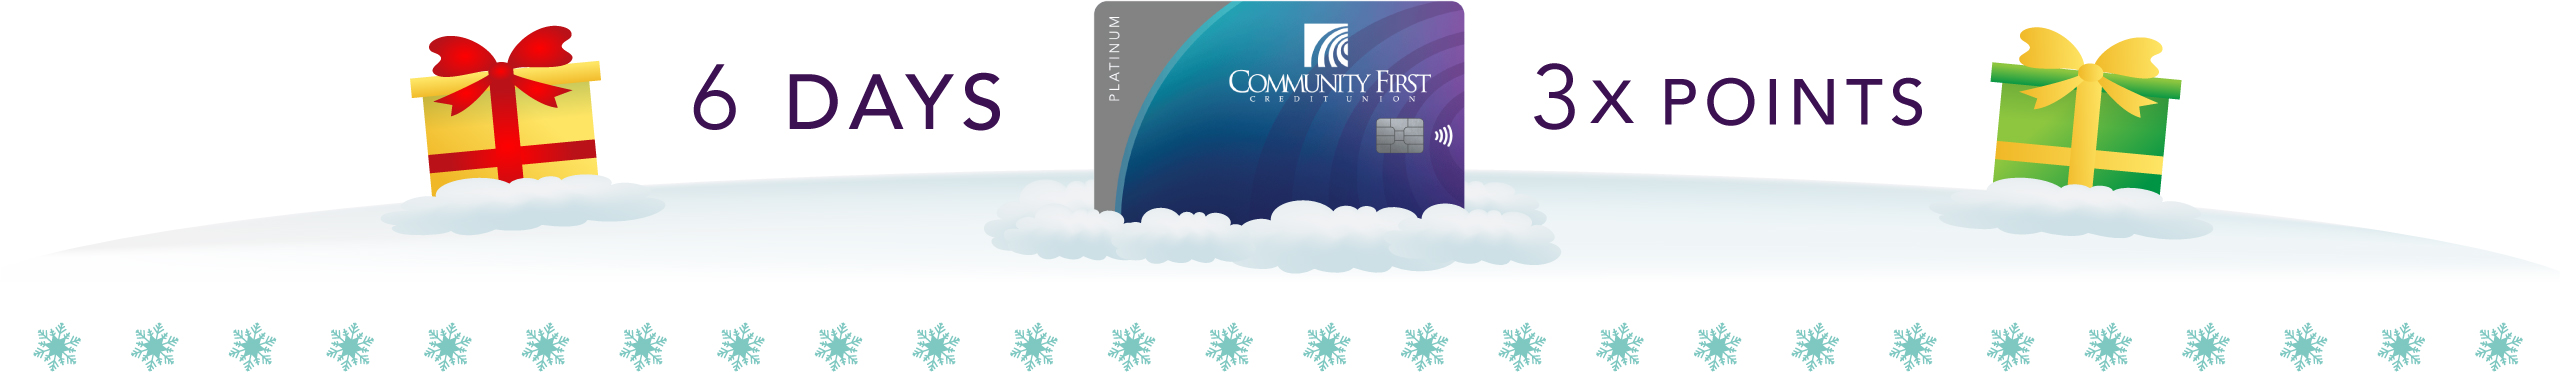 Six days 3 times the points text surrounding the Community First Credit Card with presents in footer.